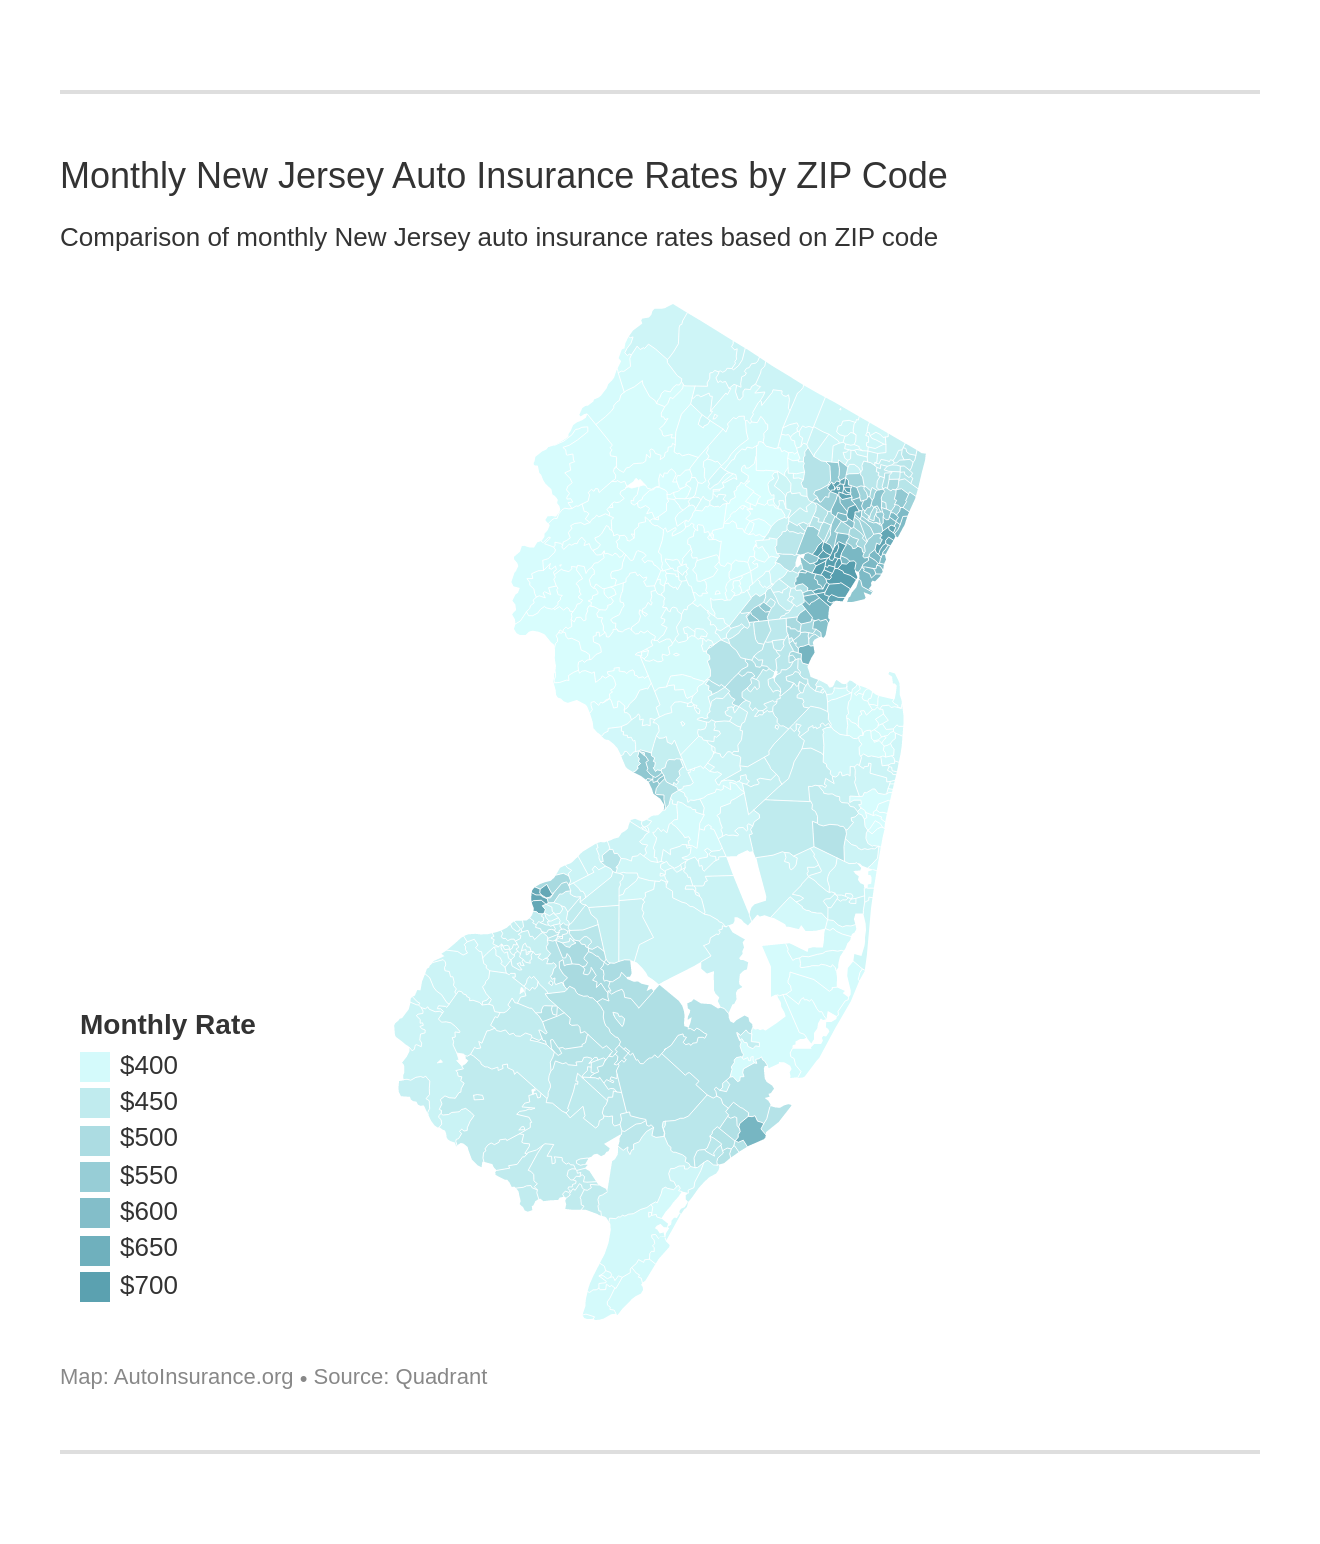 Monthly New Jersey Auto Insurance Rates by ZIP Code